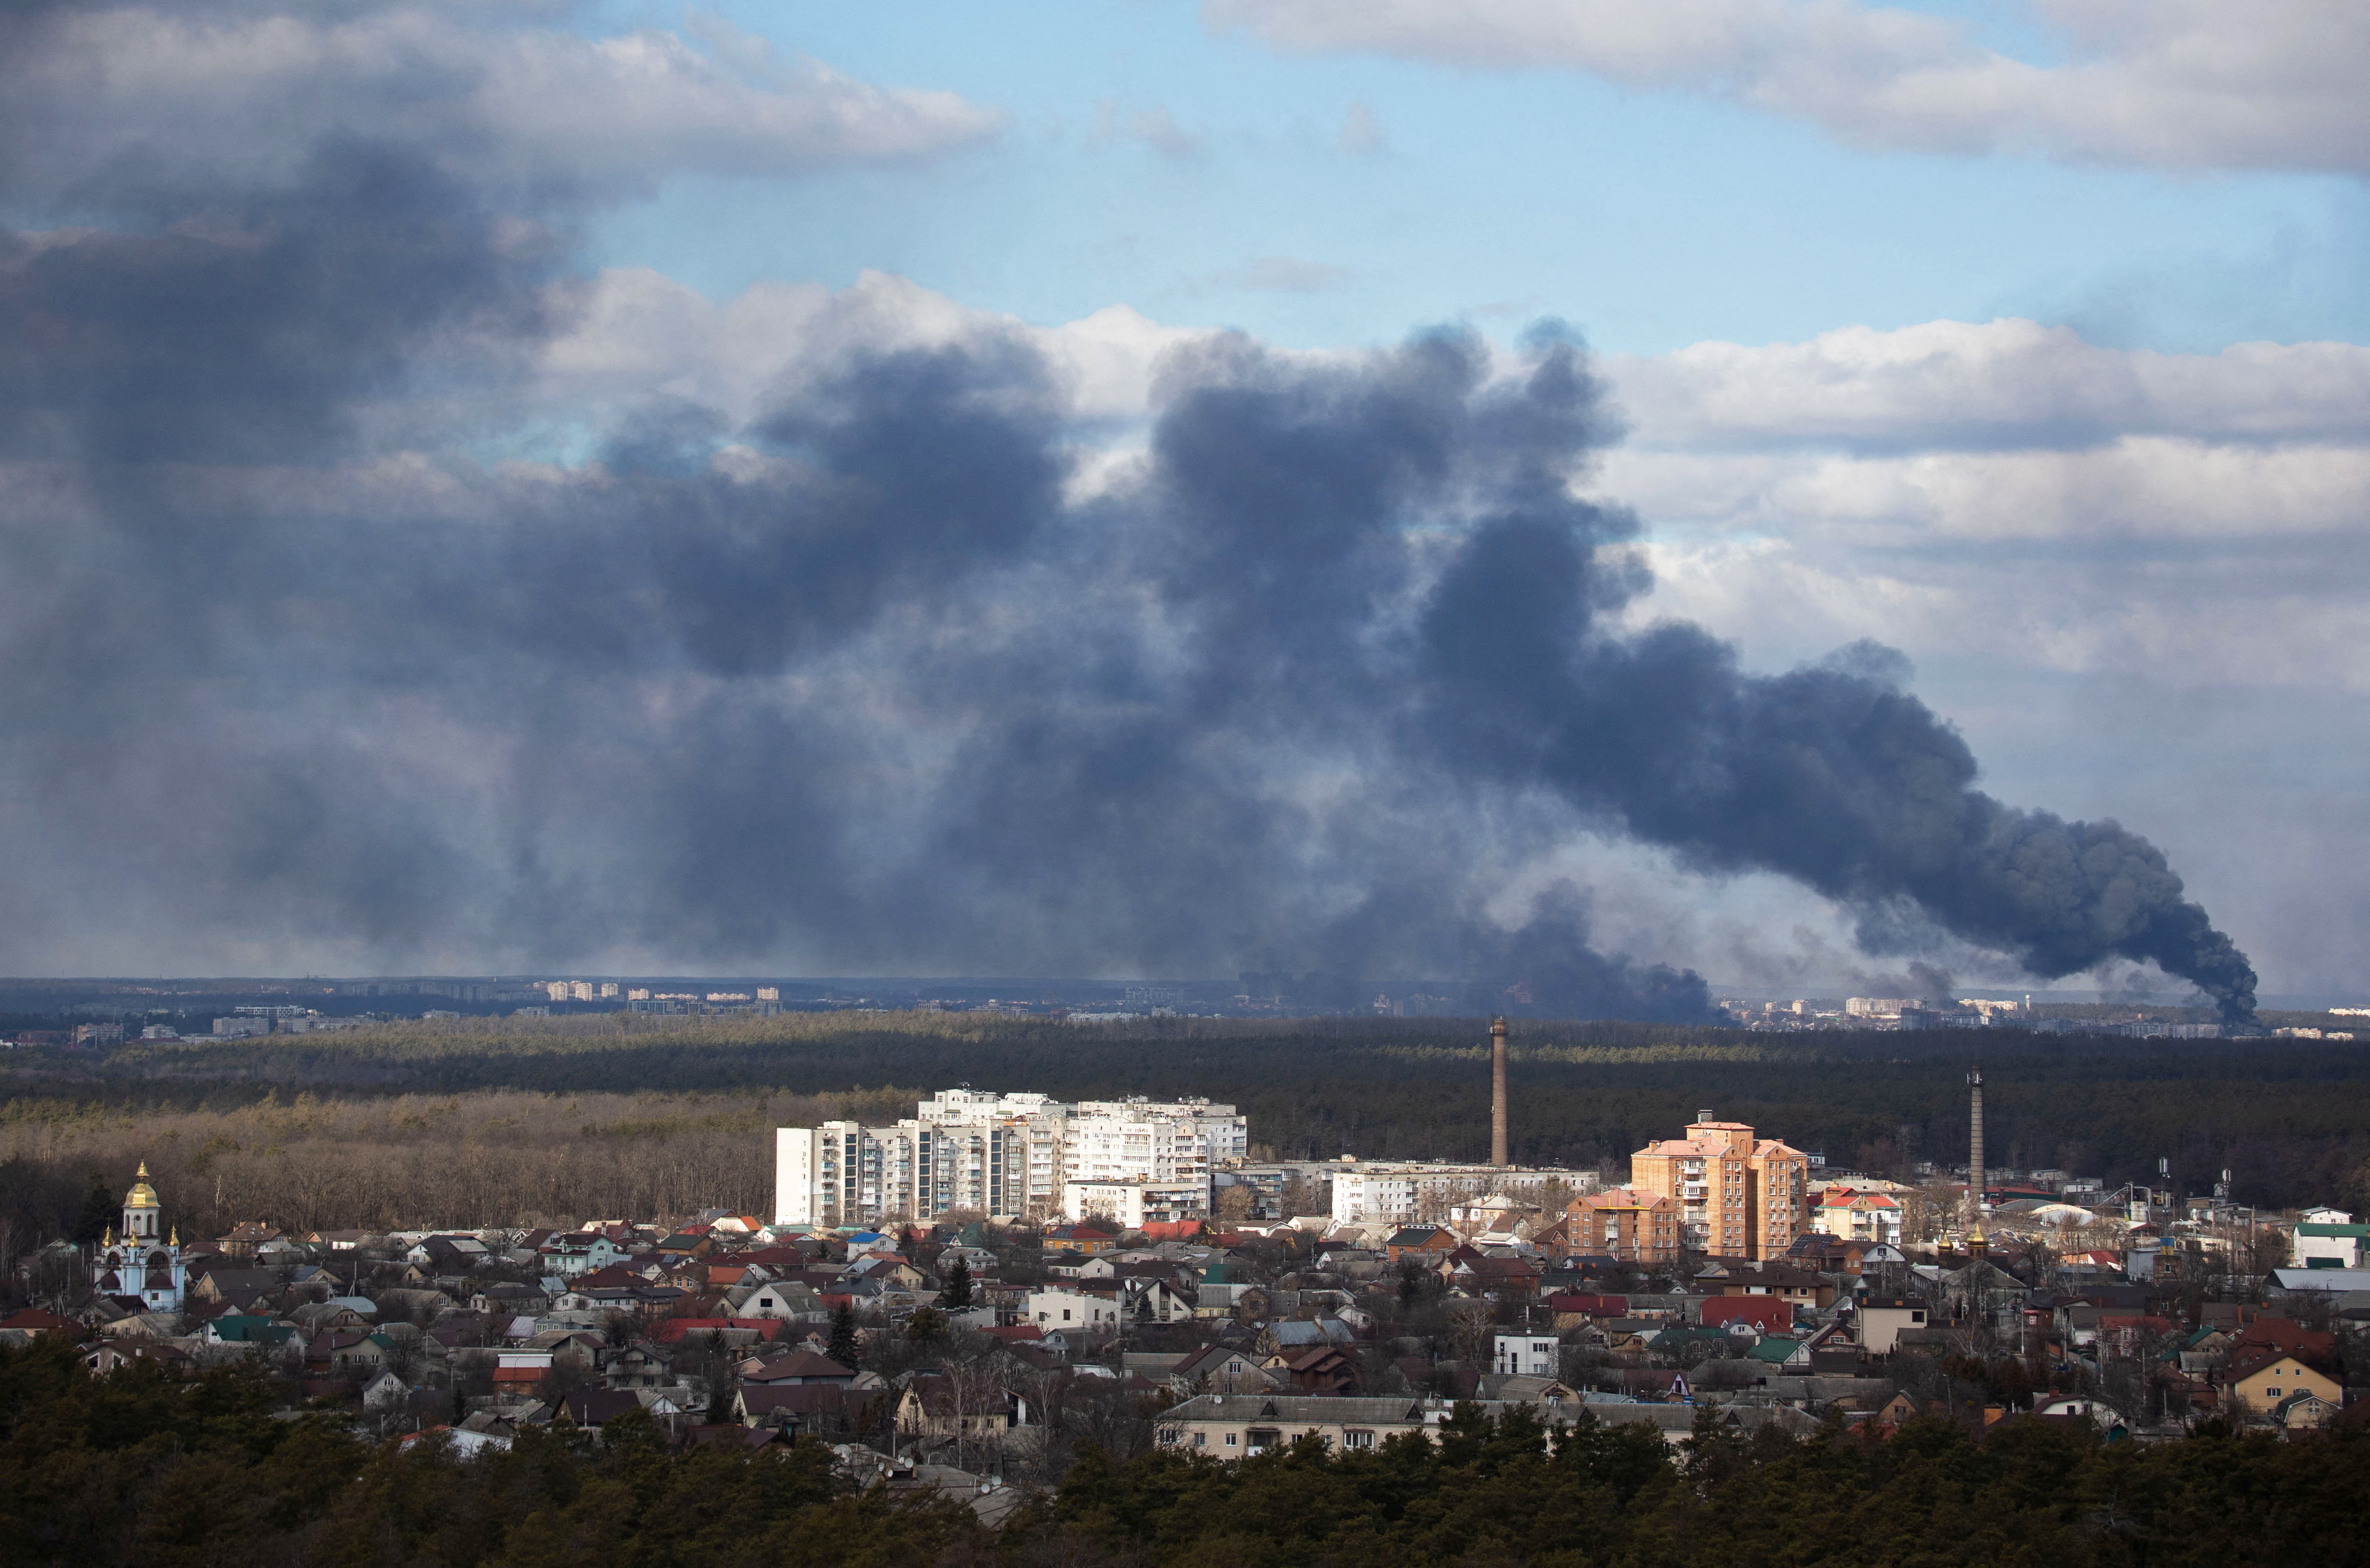 Smoke rising after shelling on the outskirts of the city is pictured from Kyiv, Ukraine February 27, 2022. REUTERS/Mykhailo Markiv/File Photo